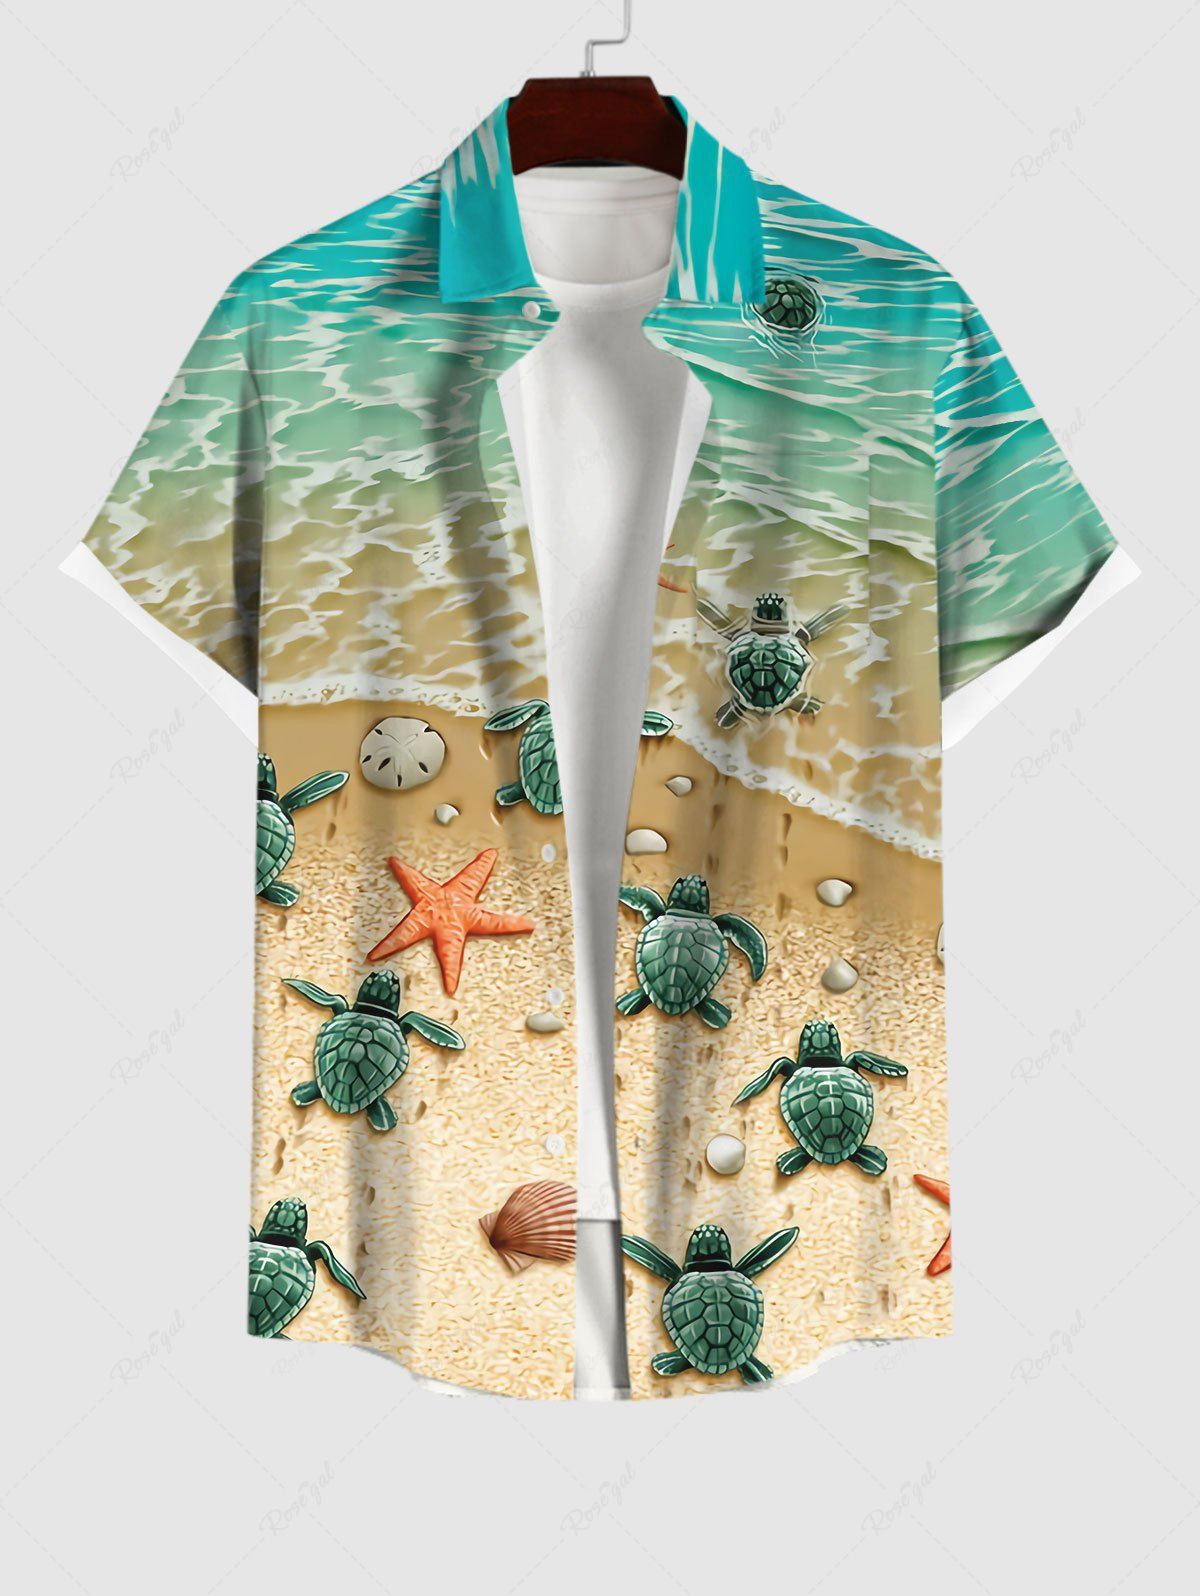 Hawaii Plus Size Sea Creatures Beach Starfish Turtle Shell Print Buttons Pocket Shirt For Men Multi-A XL